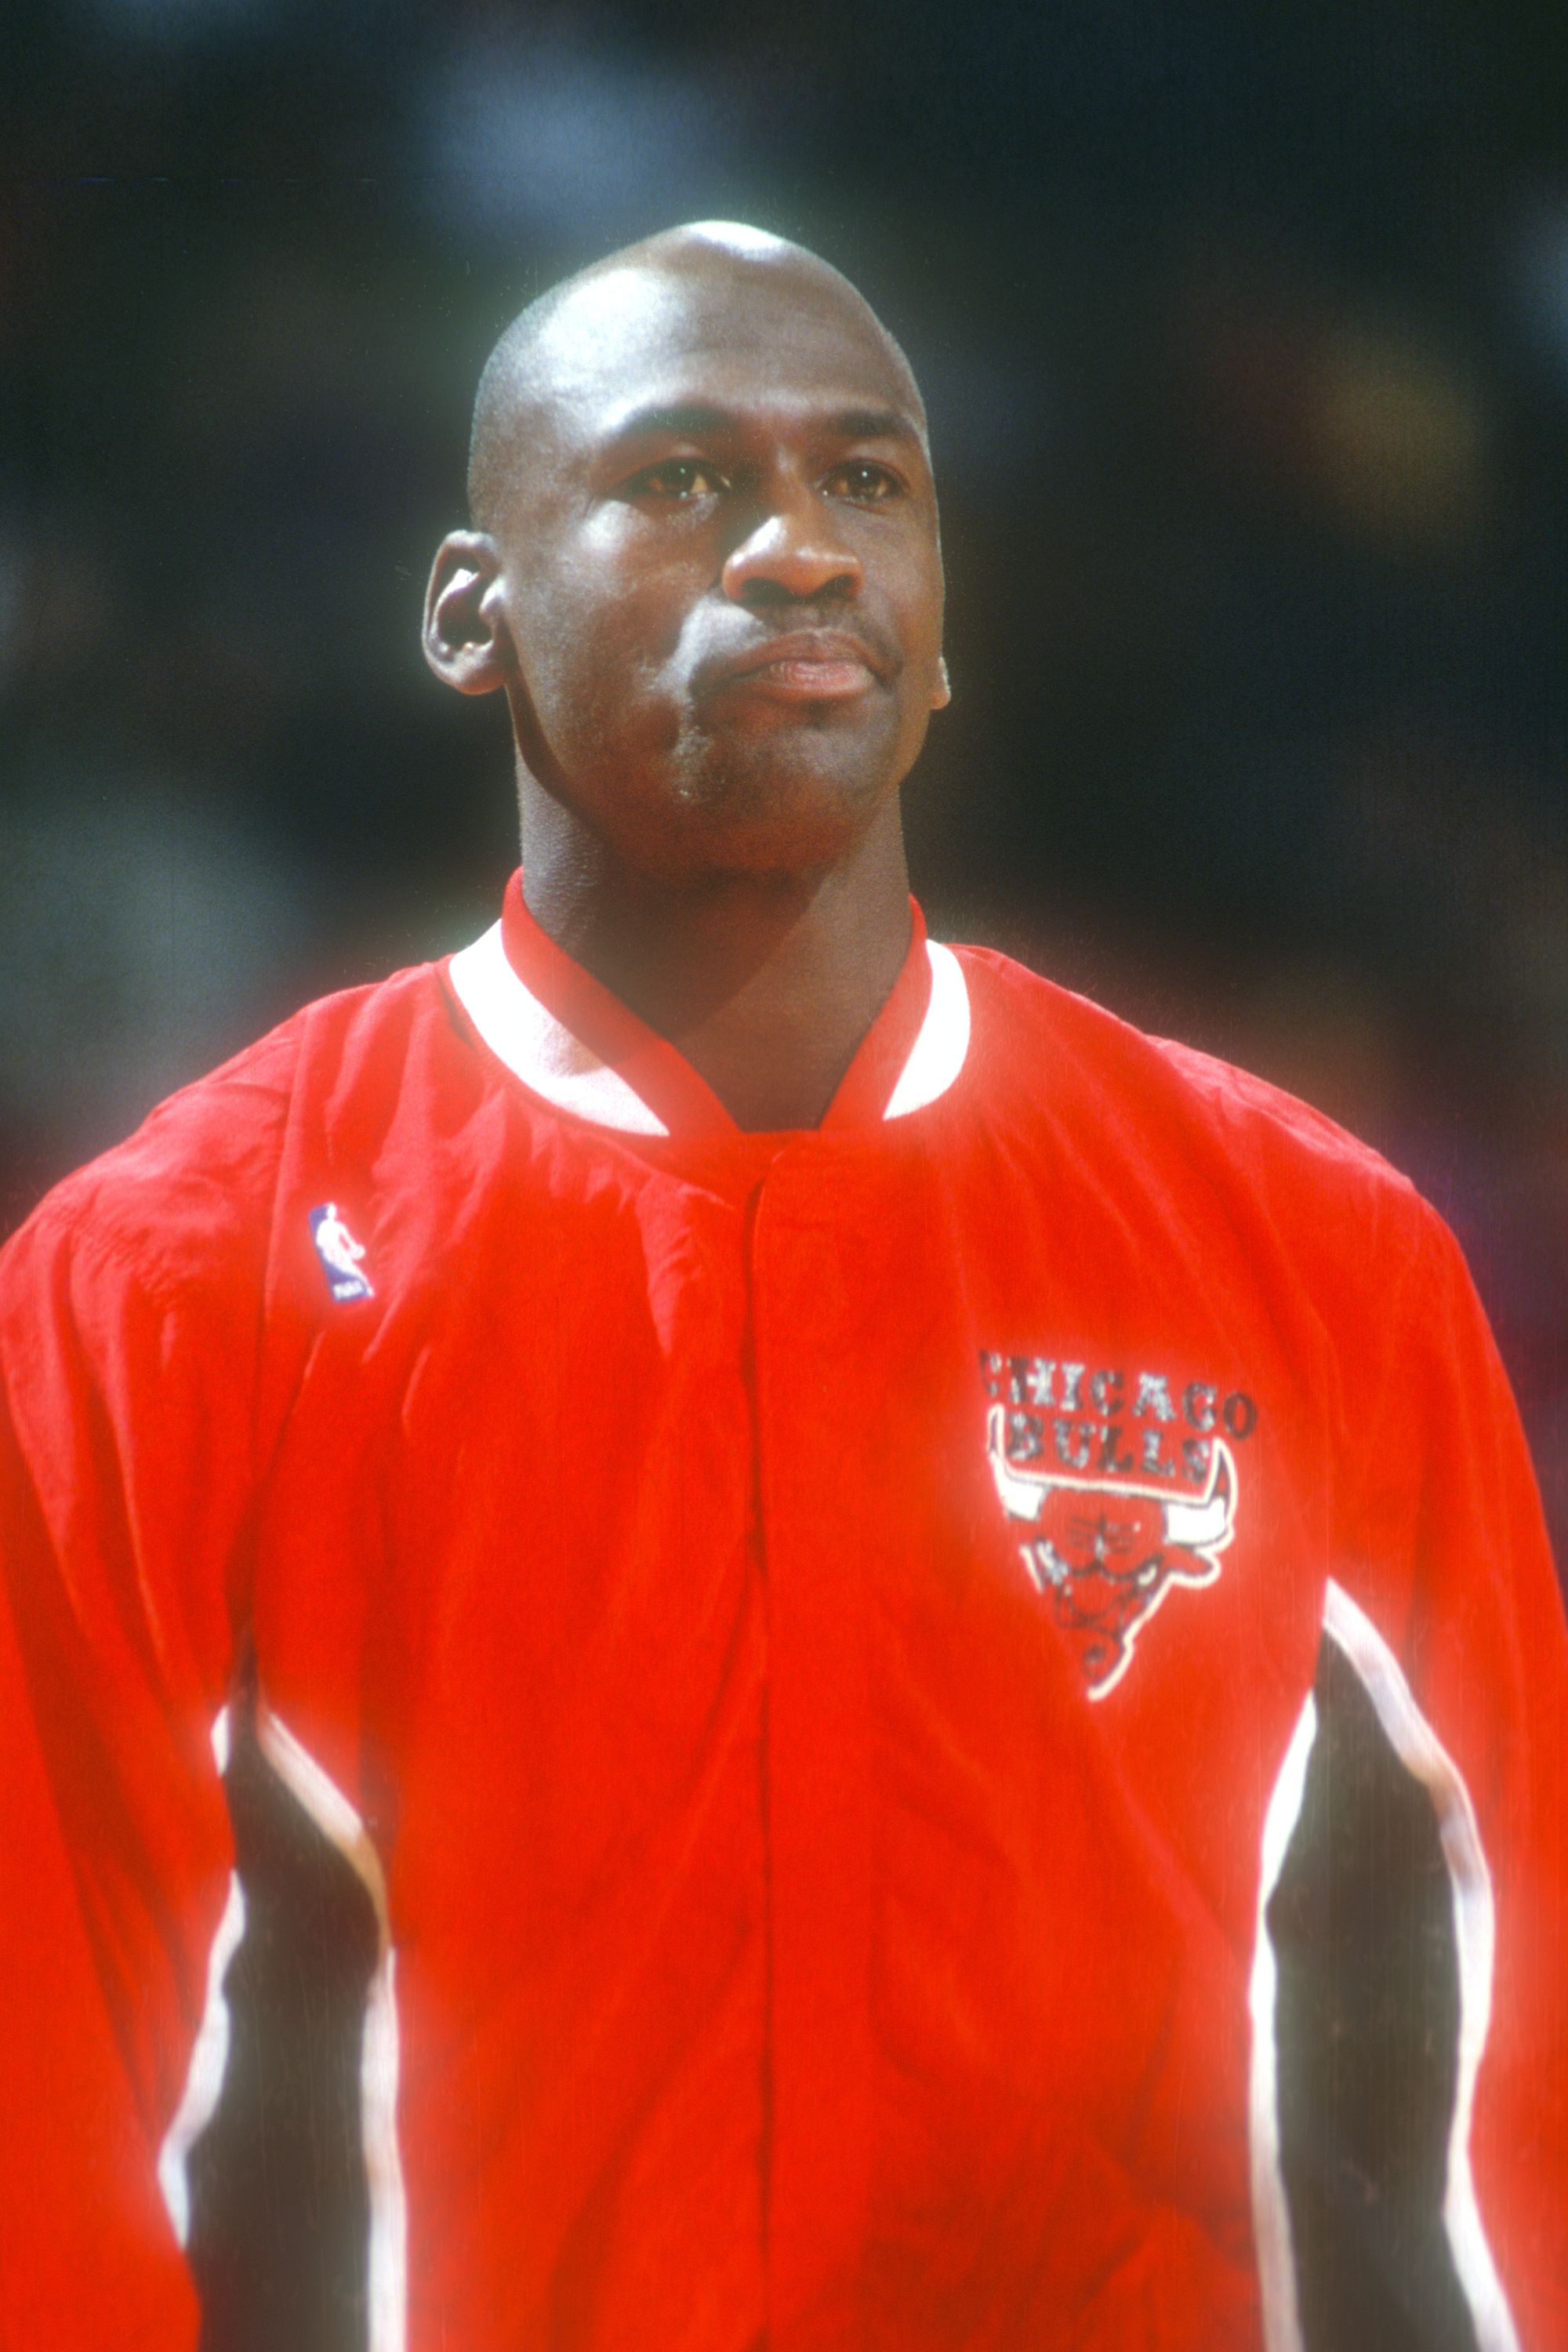 Michael Jordan before a game at Capital Centre on December 23, 1992 in Landover, Maryland | Source: Getty Images